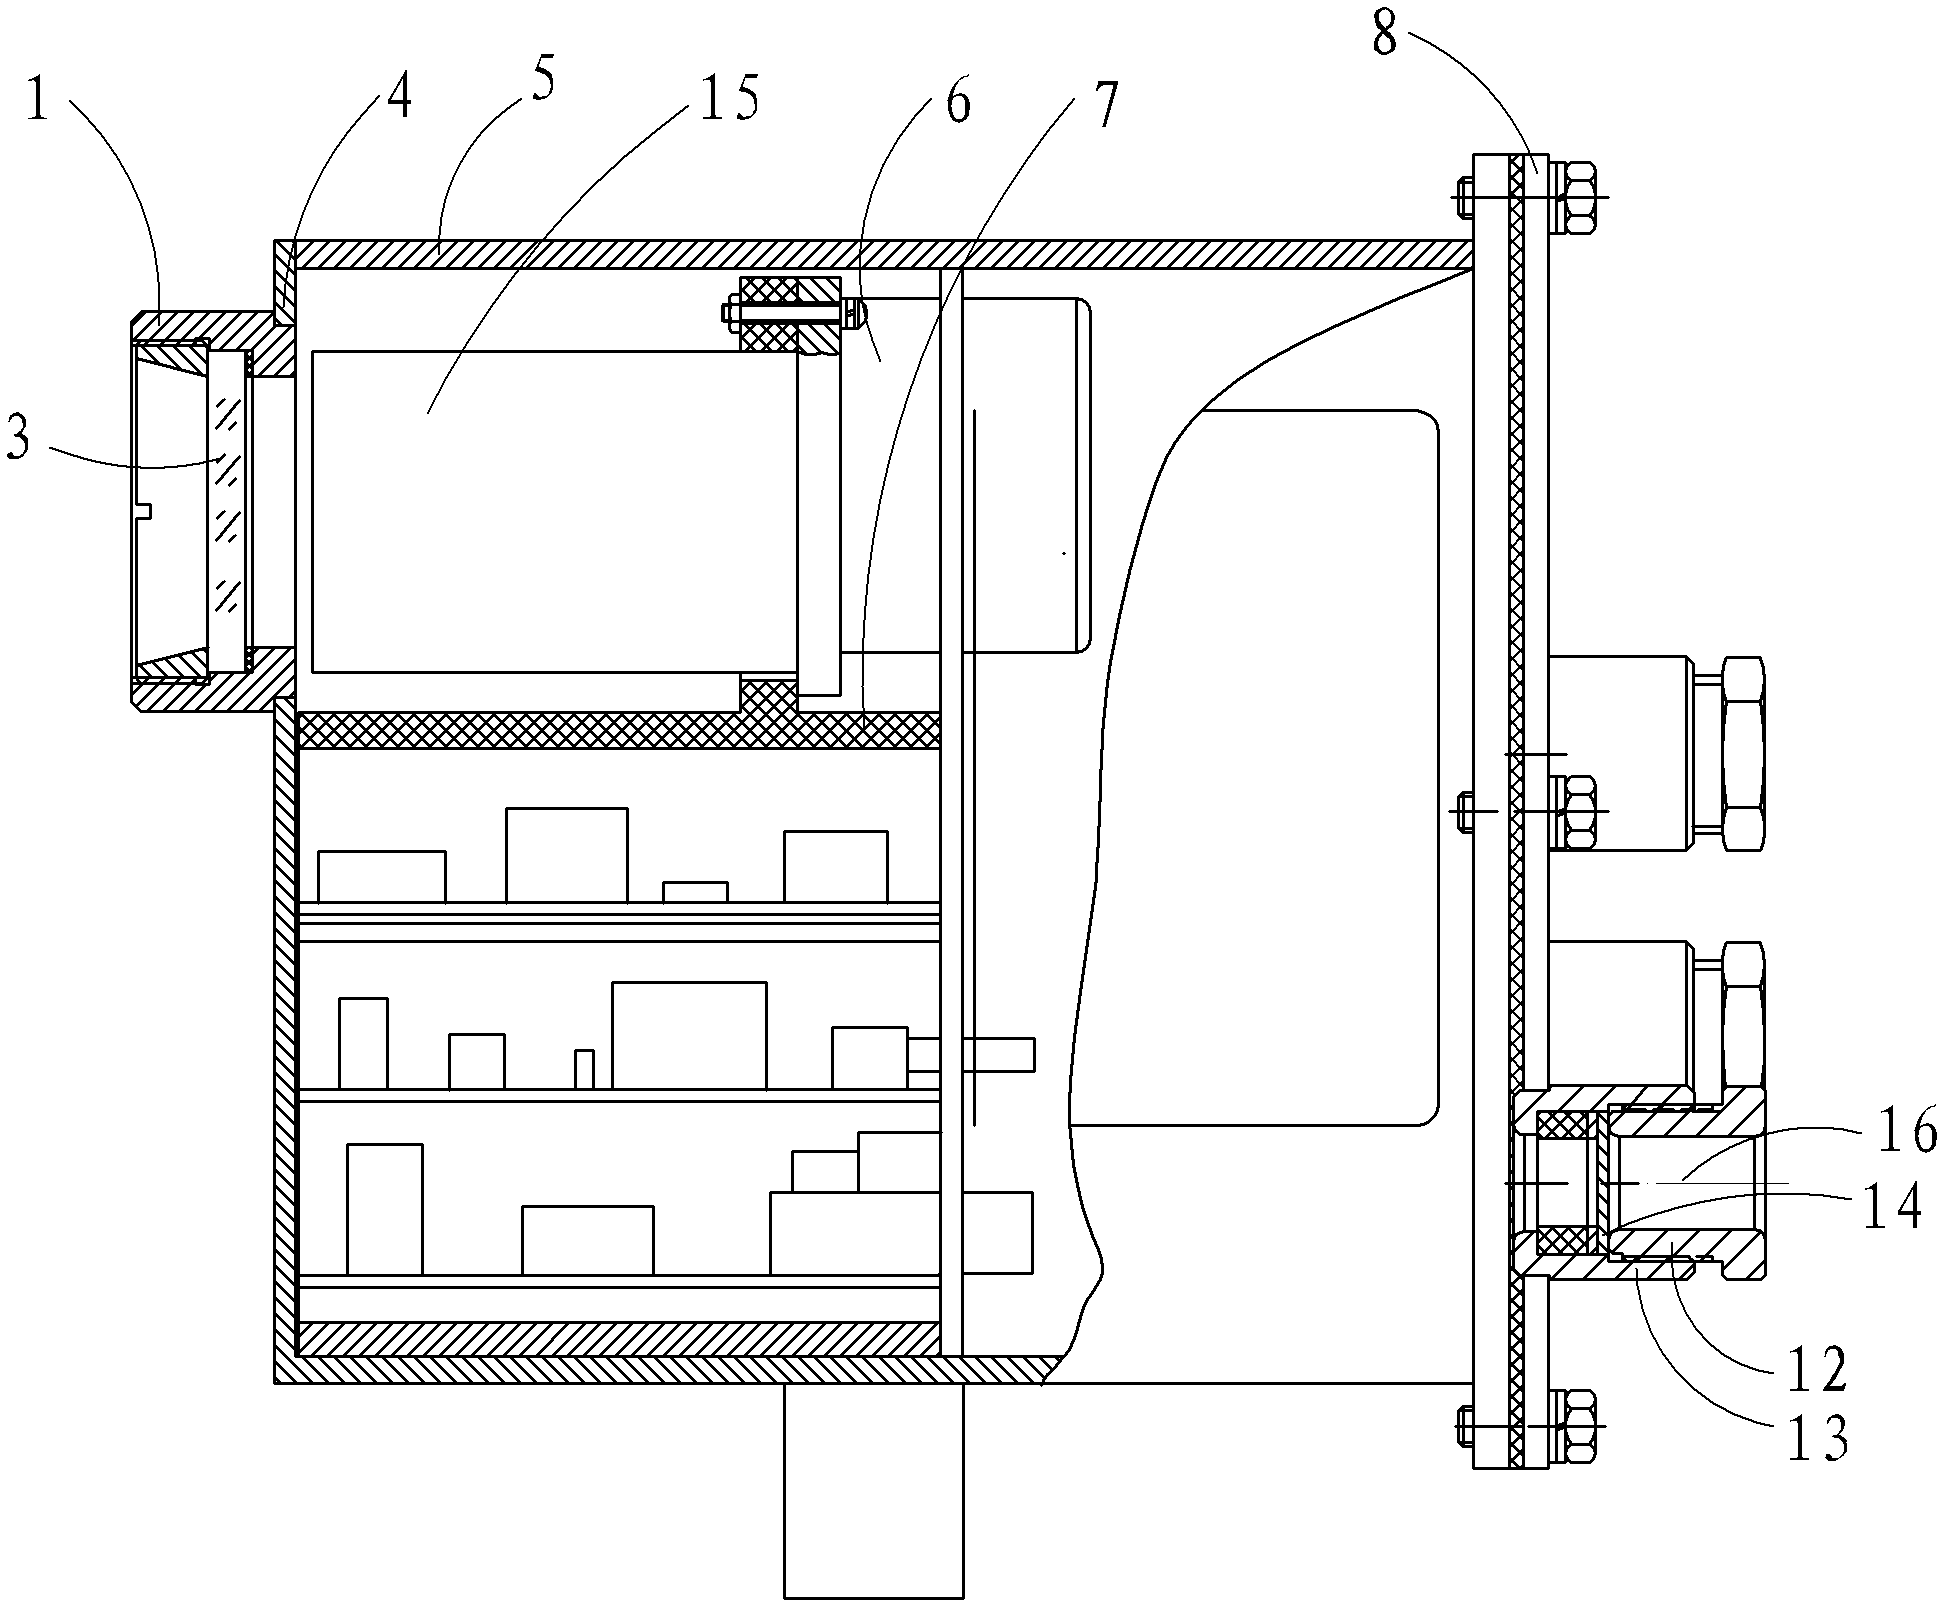 Infrared imaging device based on network